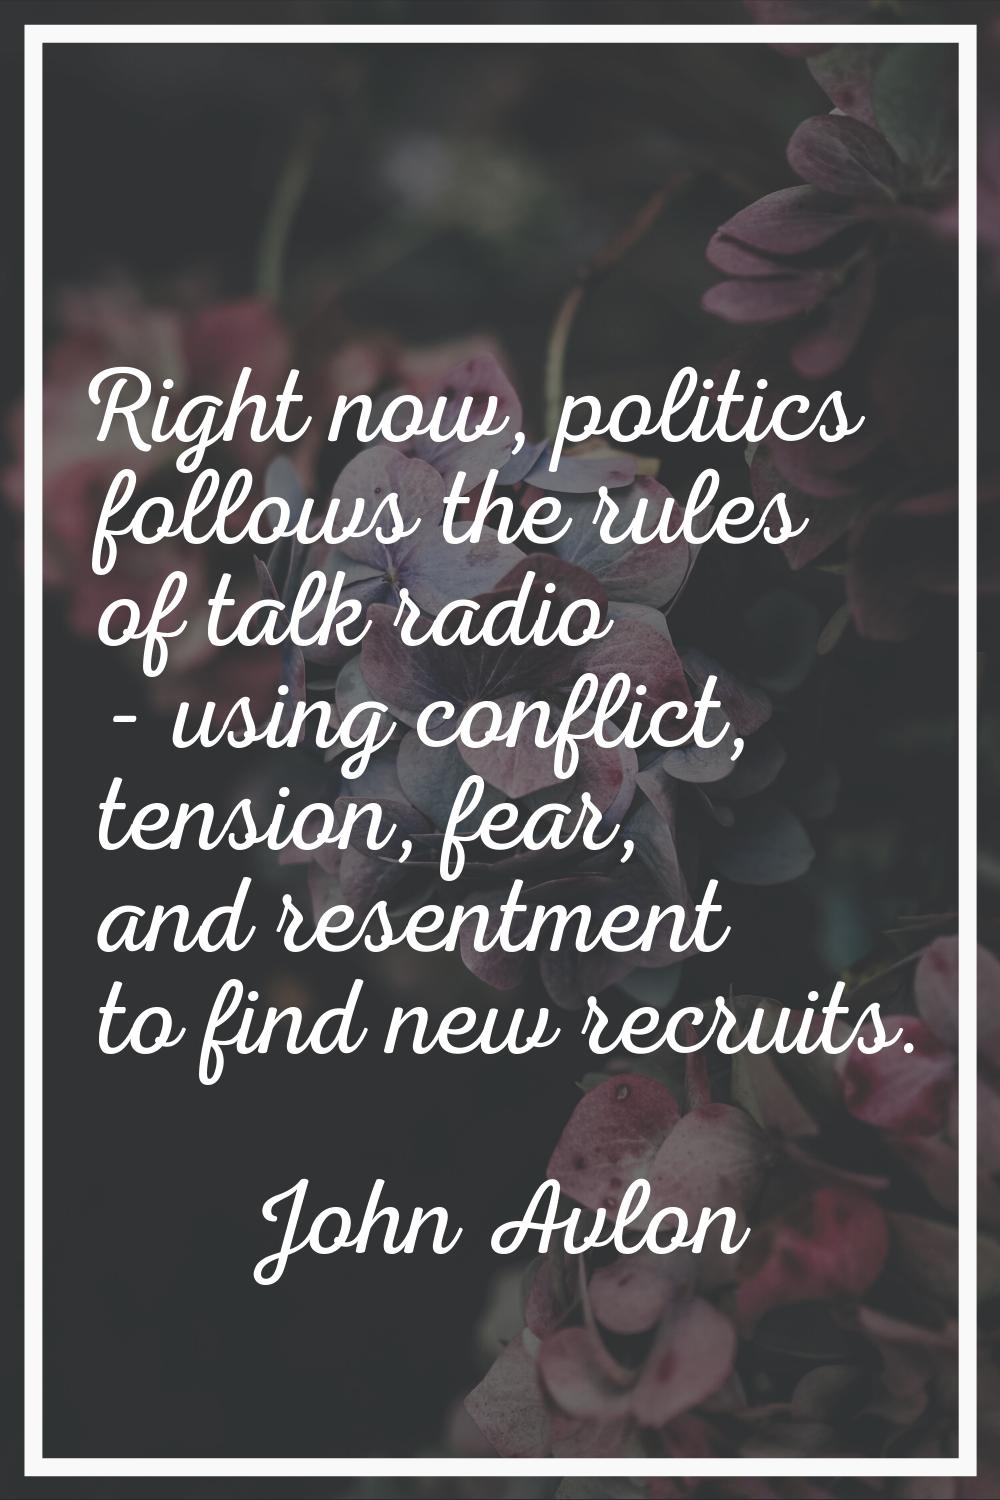 Right now, politics follows the rules of talk radio - using conflict, tension, fear, and resentment